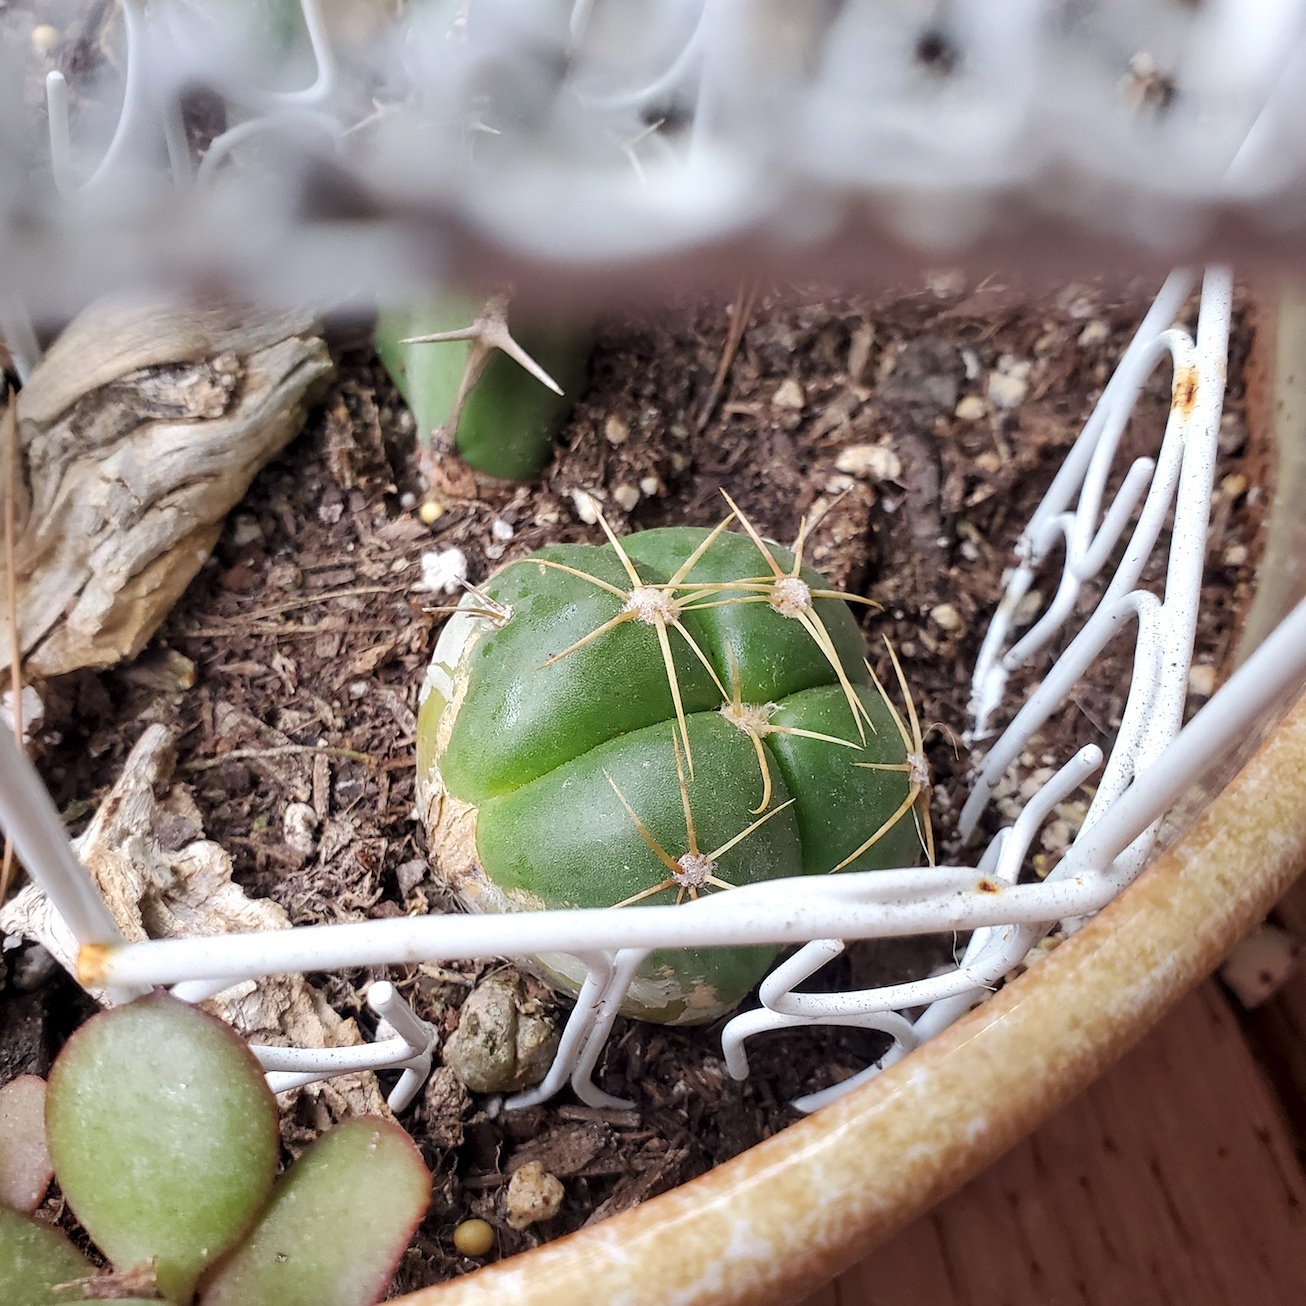 A round brazilian cactus, and incredibly slow-growing